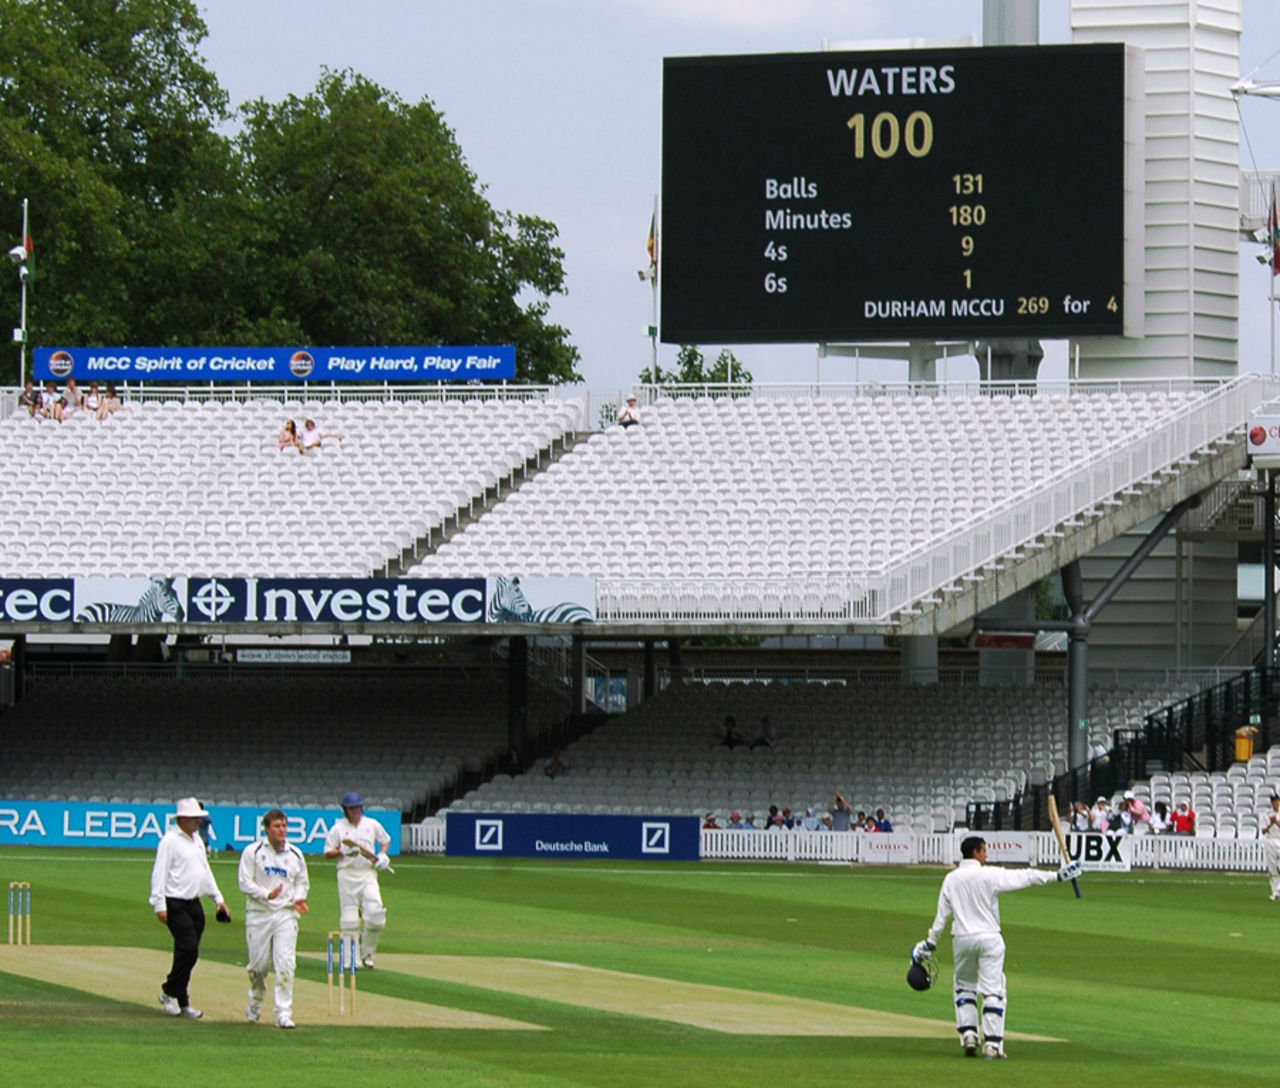 Seren Waters reaches his hundred for Durham University against Loughborough University in the MCC Universities final, Lord's, June 25, 2010 